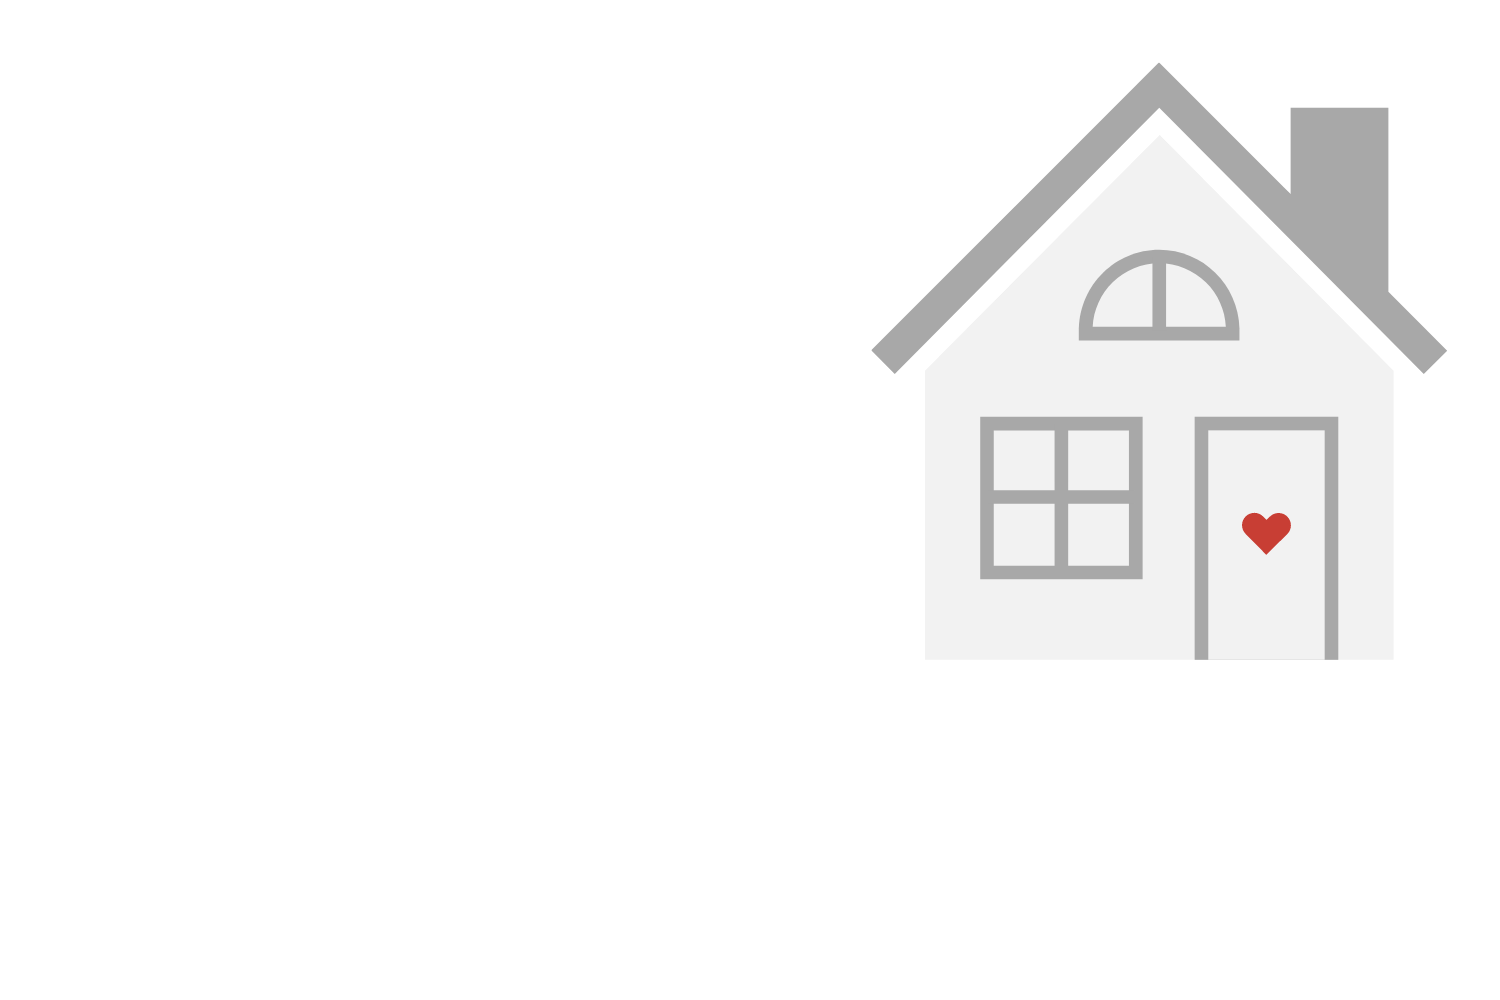 Vernon, TX Homes For Sale - Real Estate by Homes.com